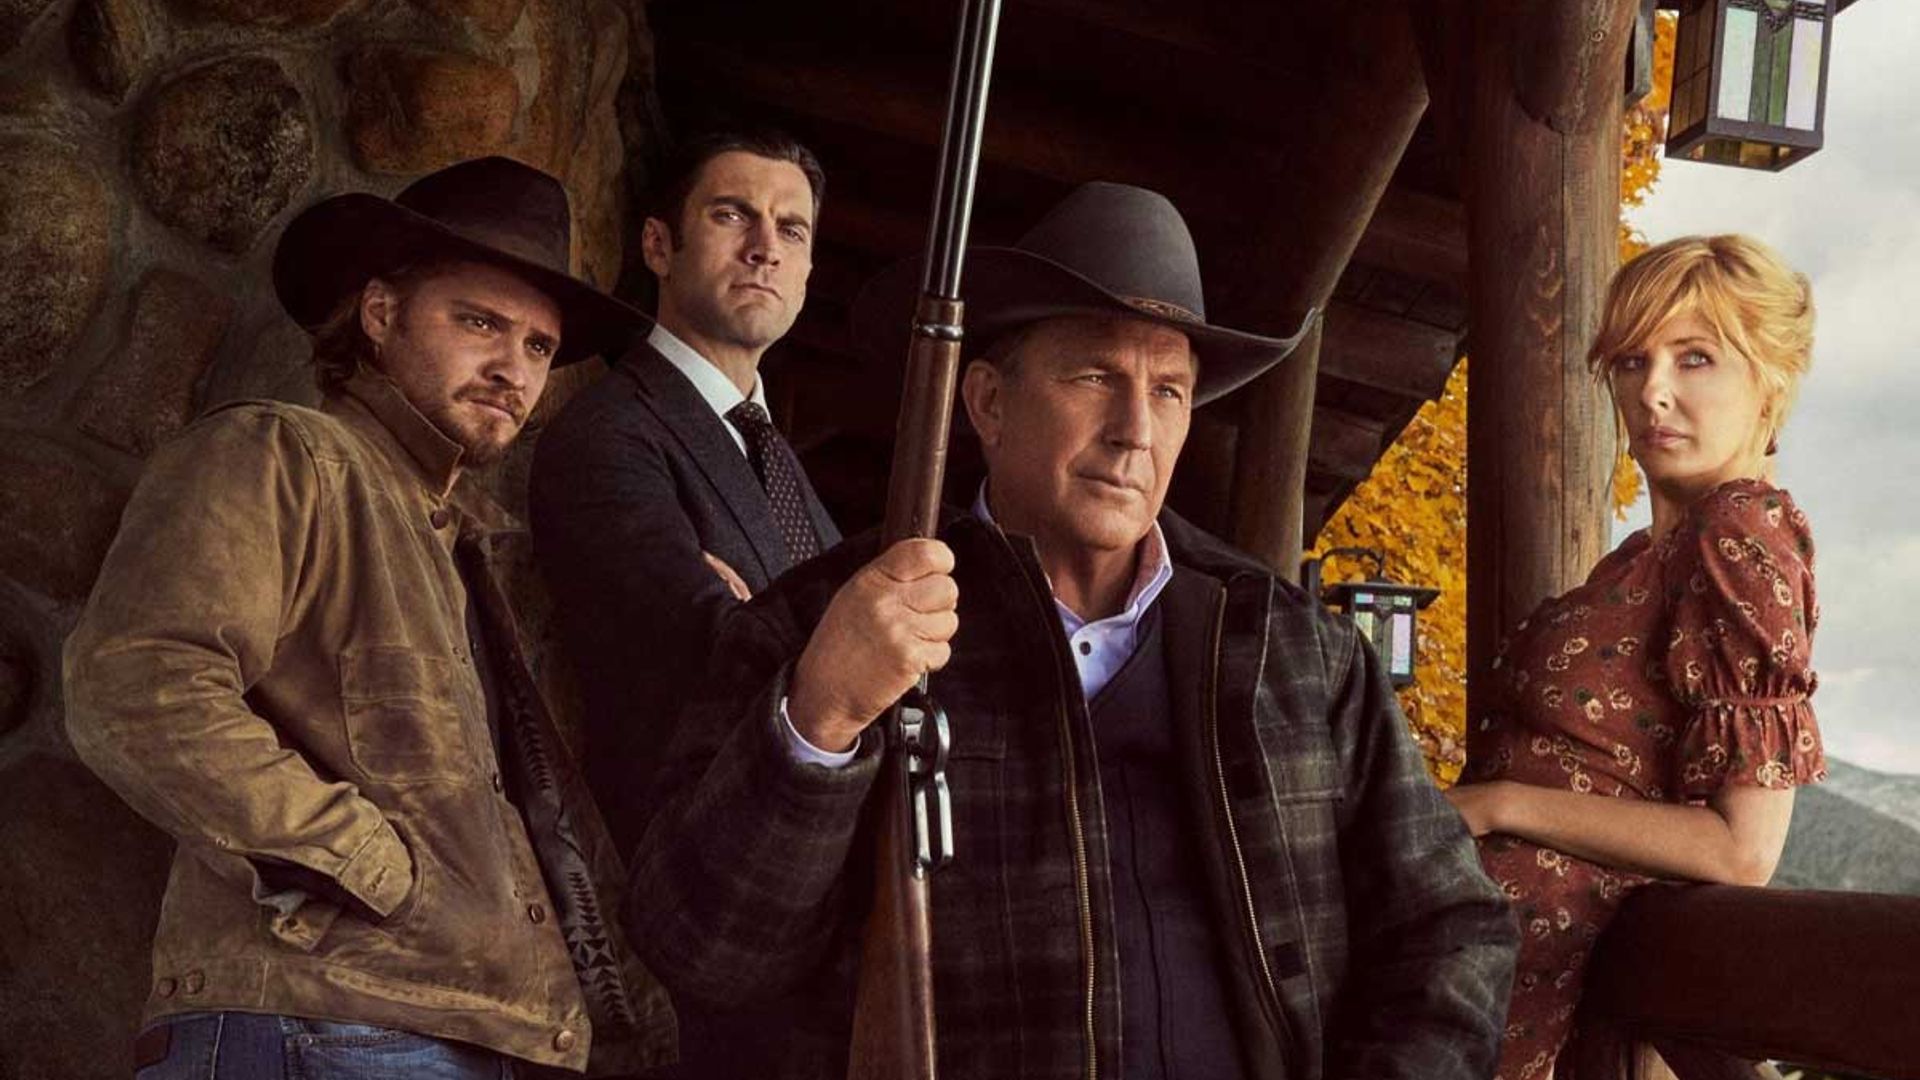 Who Is Buster Welch From Yellowstone?